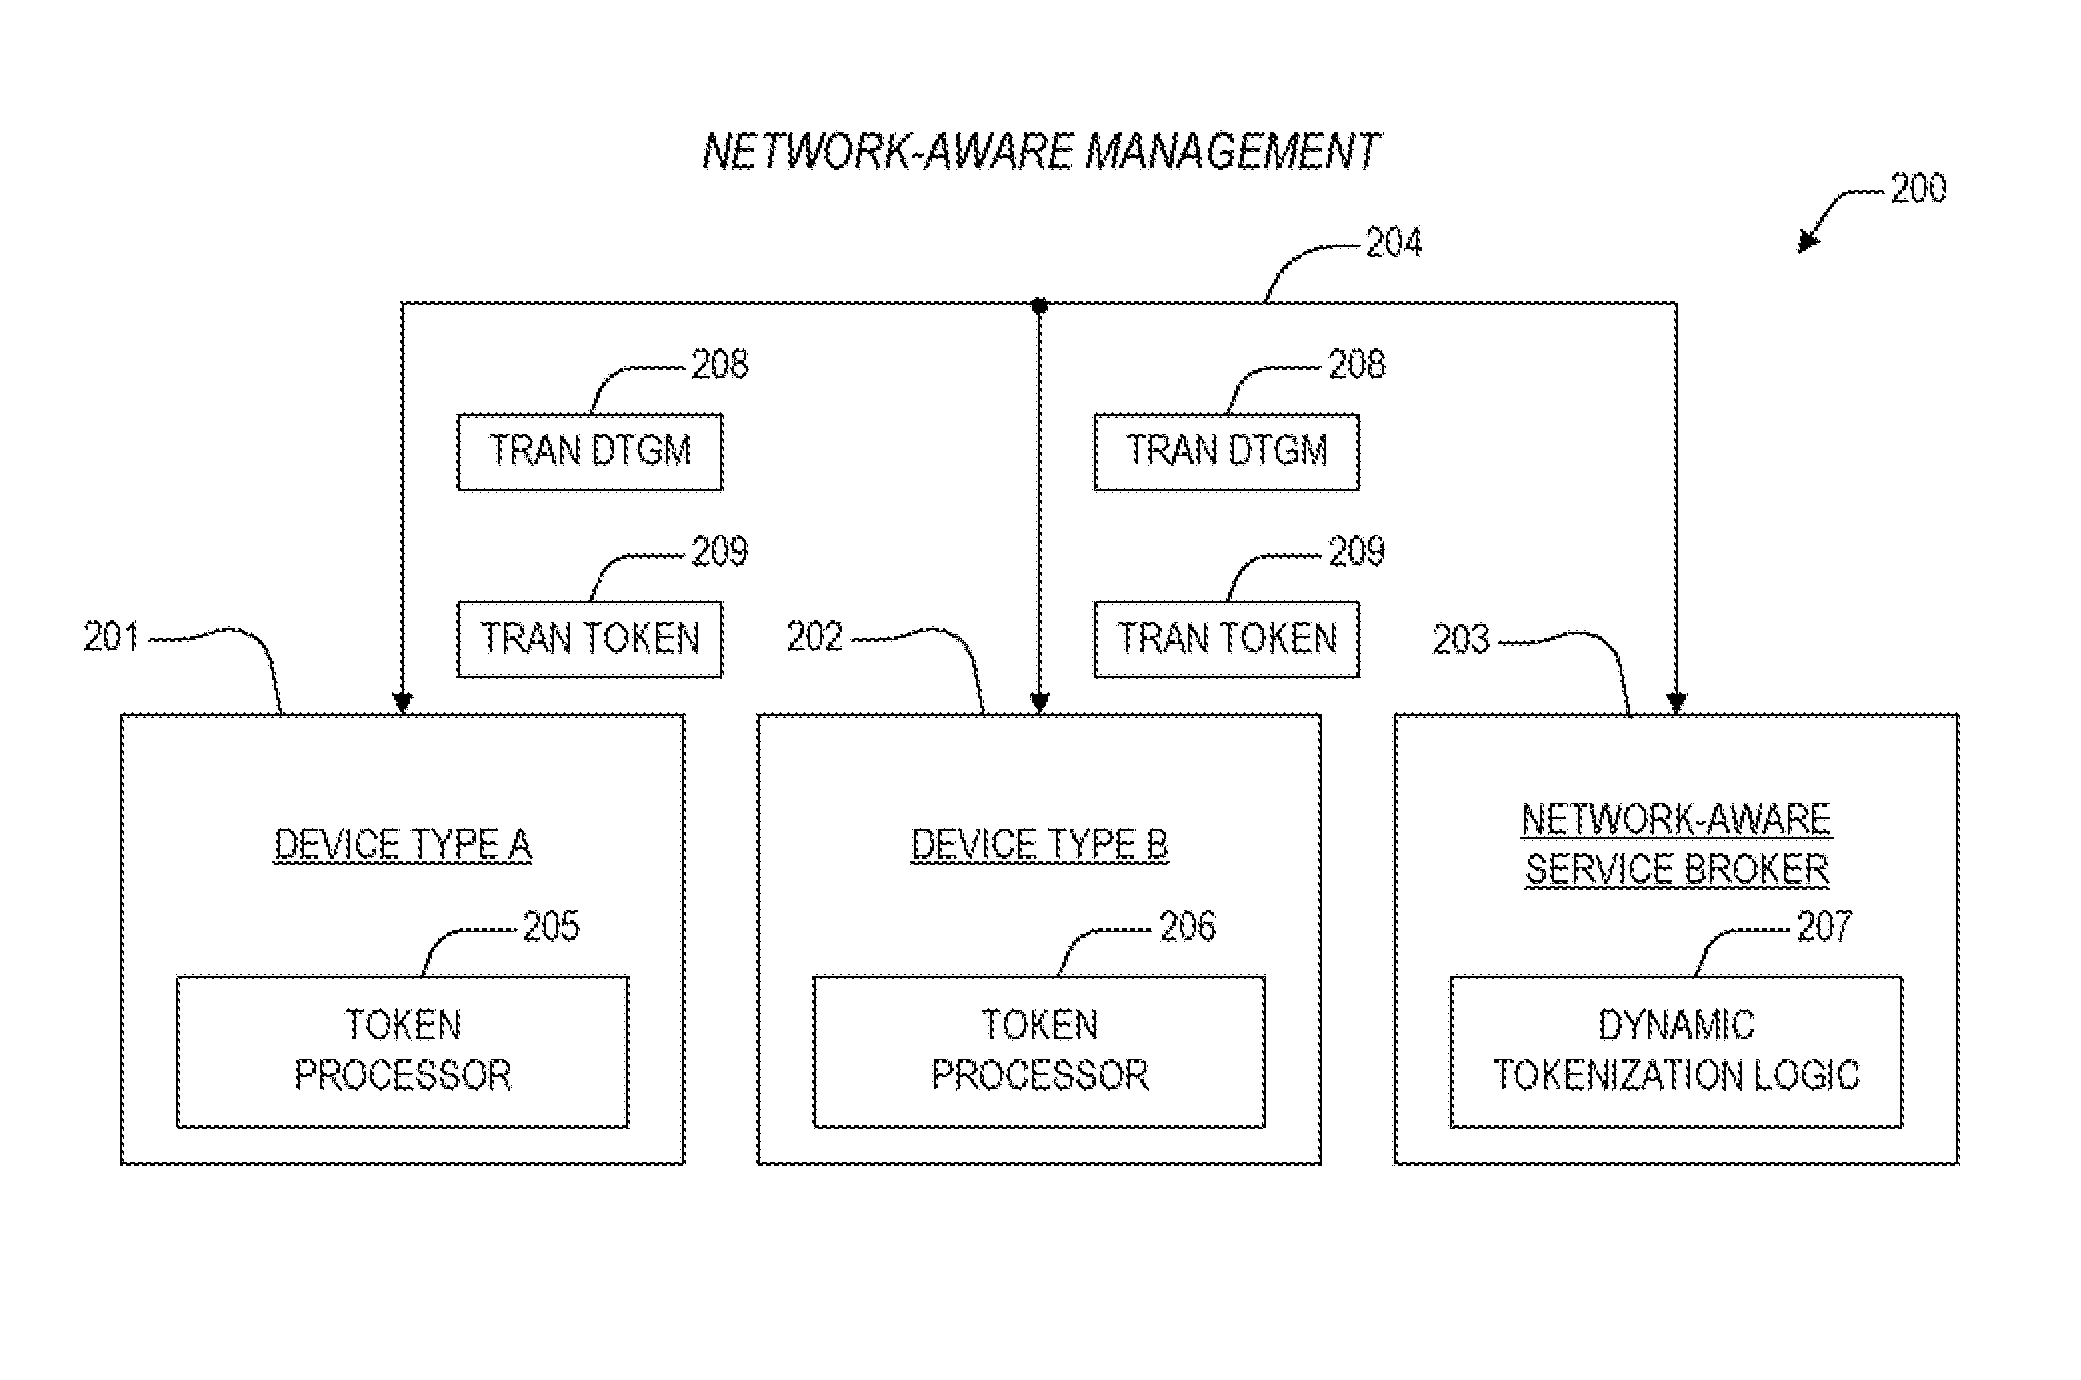 Apparatus and Method for Dynamic Tokenization of Wireless Network Datagrams